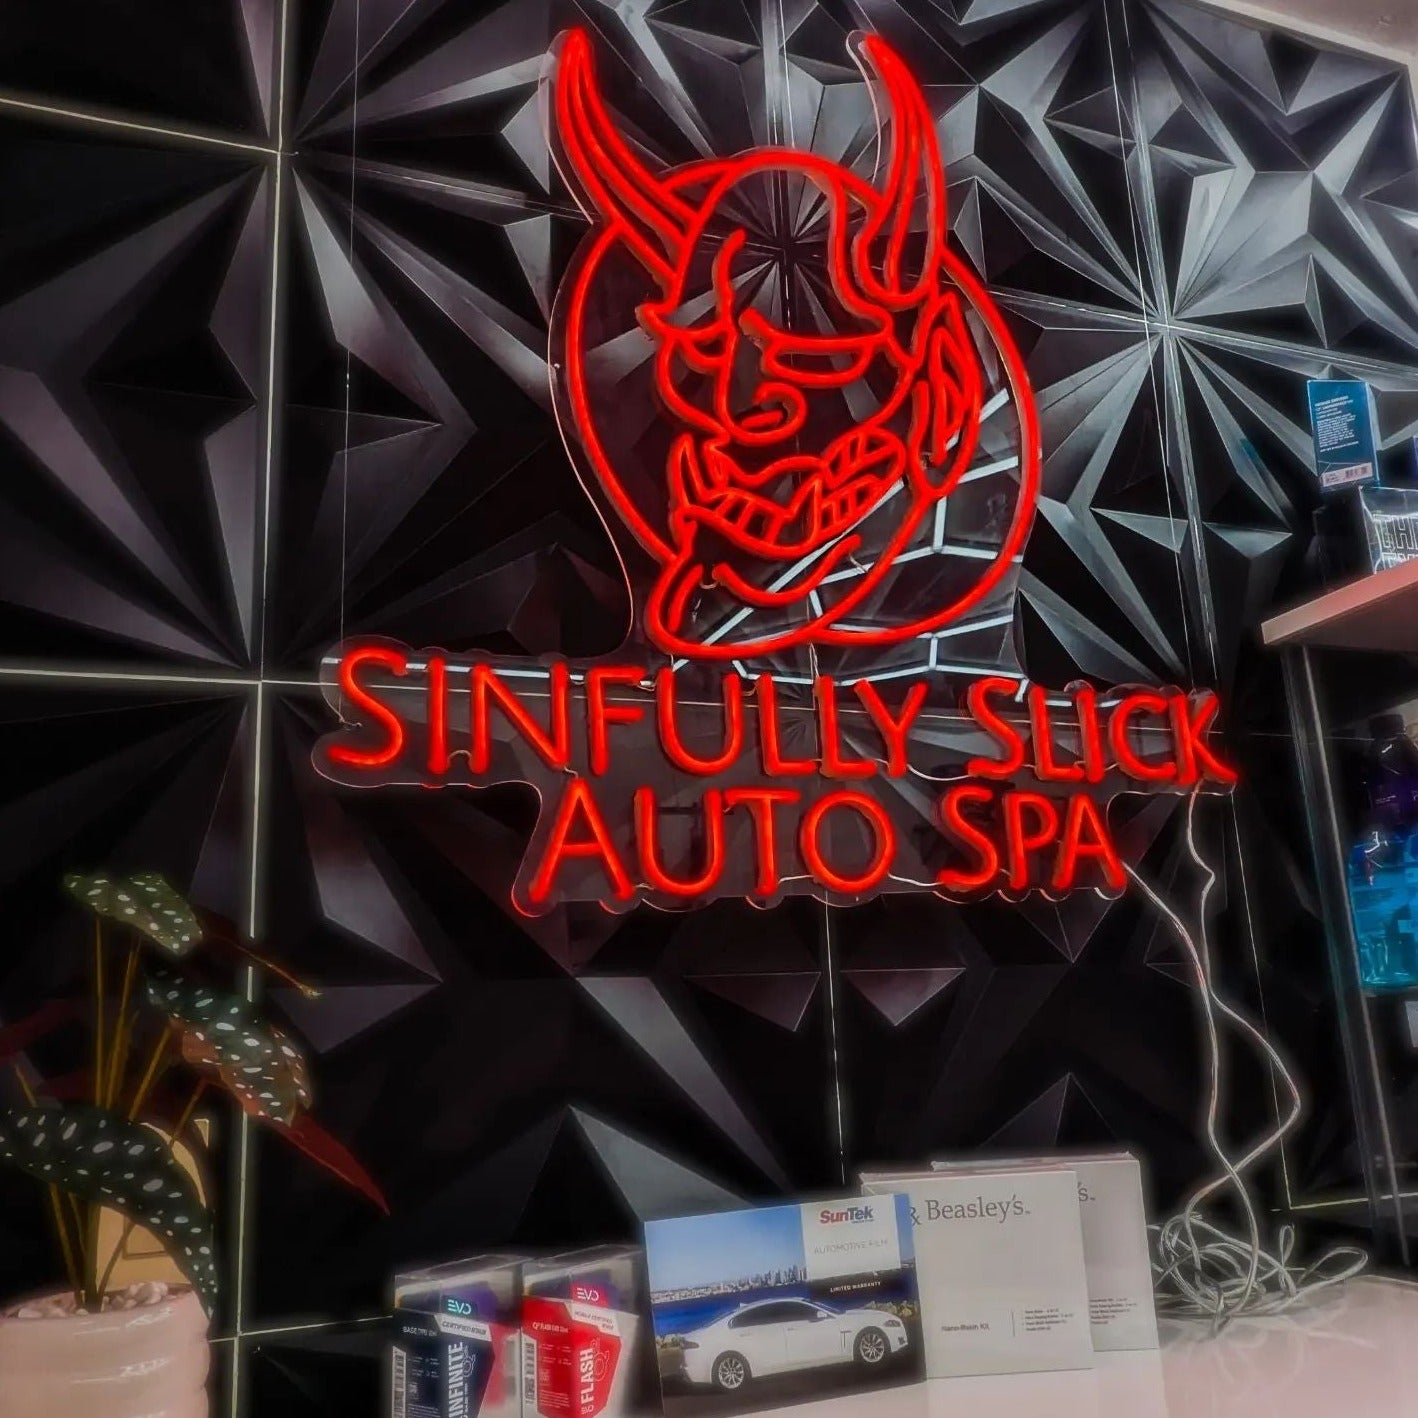 Sinfully Slick Auto Spa Neon Sign